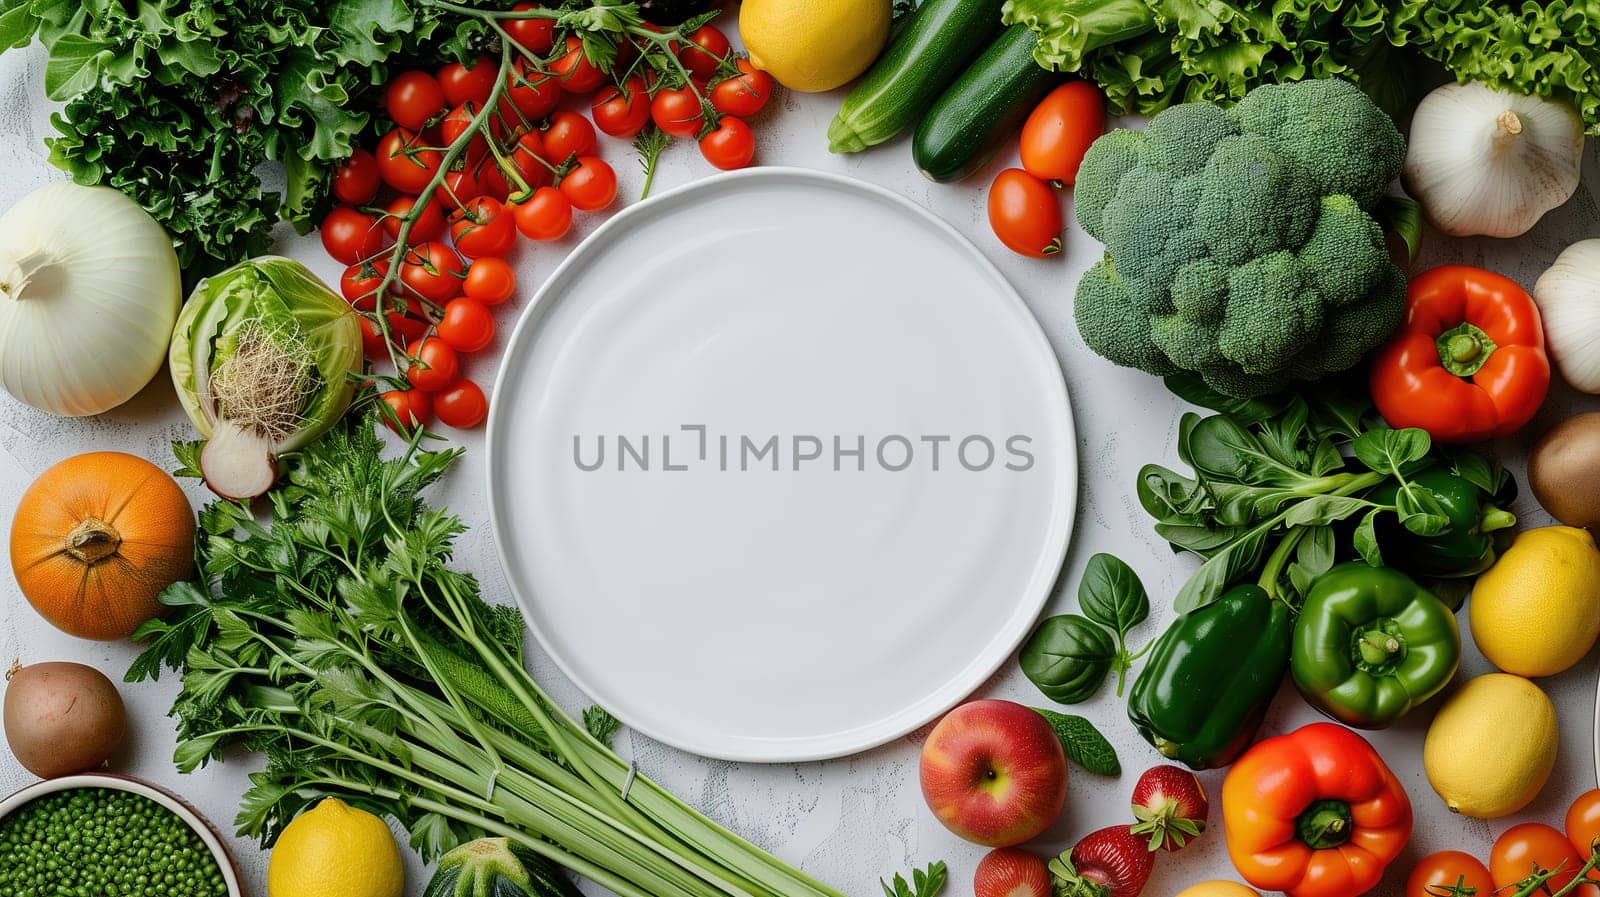 A variety of fresh vegetables are neatly arranged on a table, showcasing different shapes, colors, and textures. Carrots, tomatoes, cucumbers, lettuce, bell peppers, and more are displayed for a bountiful feast.